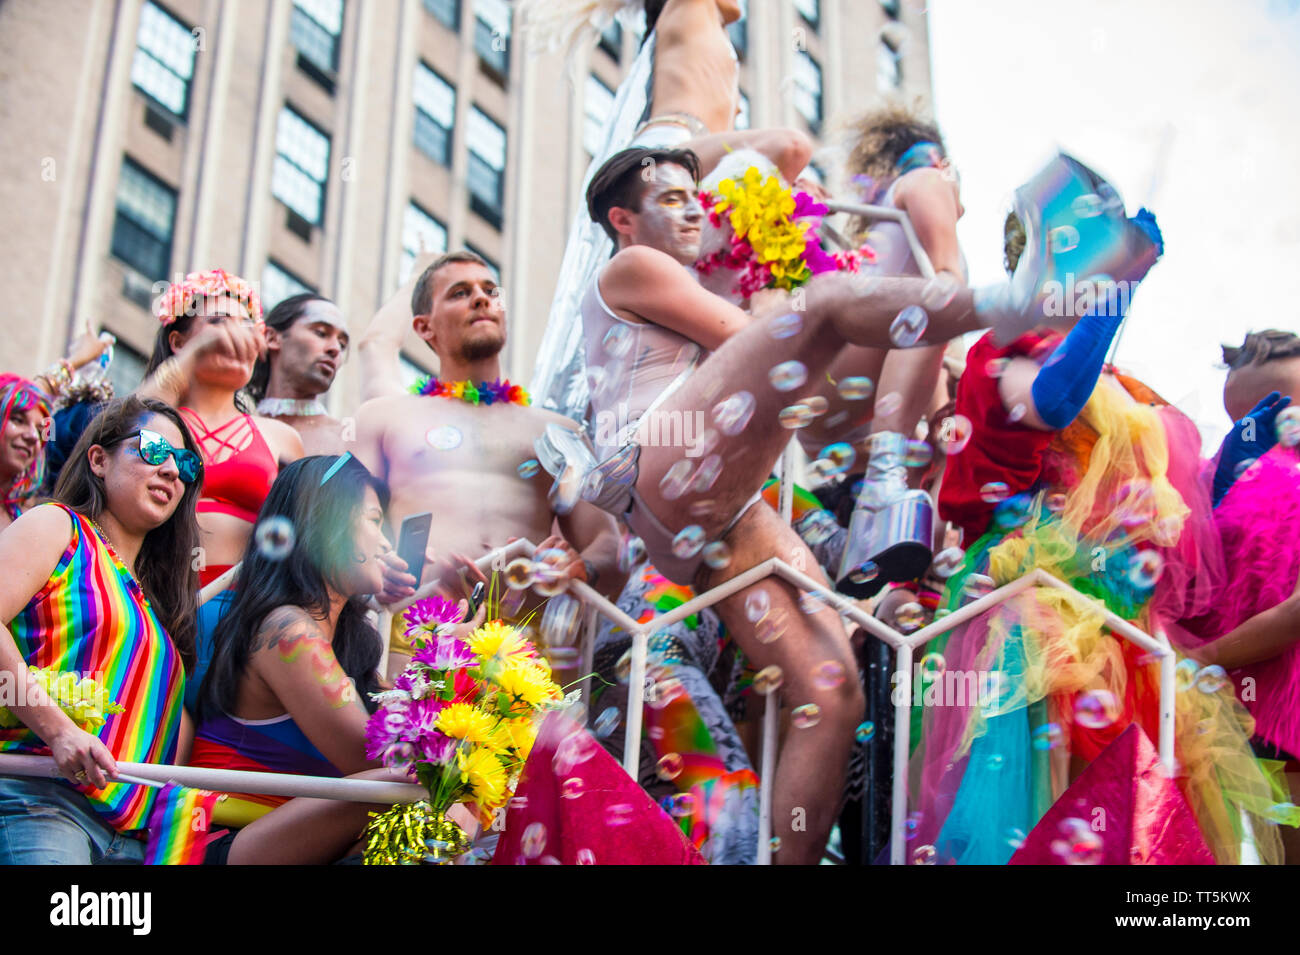 NEW YORK CITY - JUNE 25, 2017: A float crowded with dancers in flamboyant costumes passes through Greenwich Village in the annual gay Pride Parade. Stock Photo